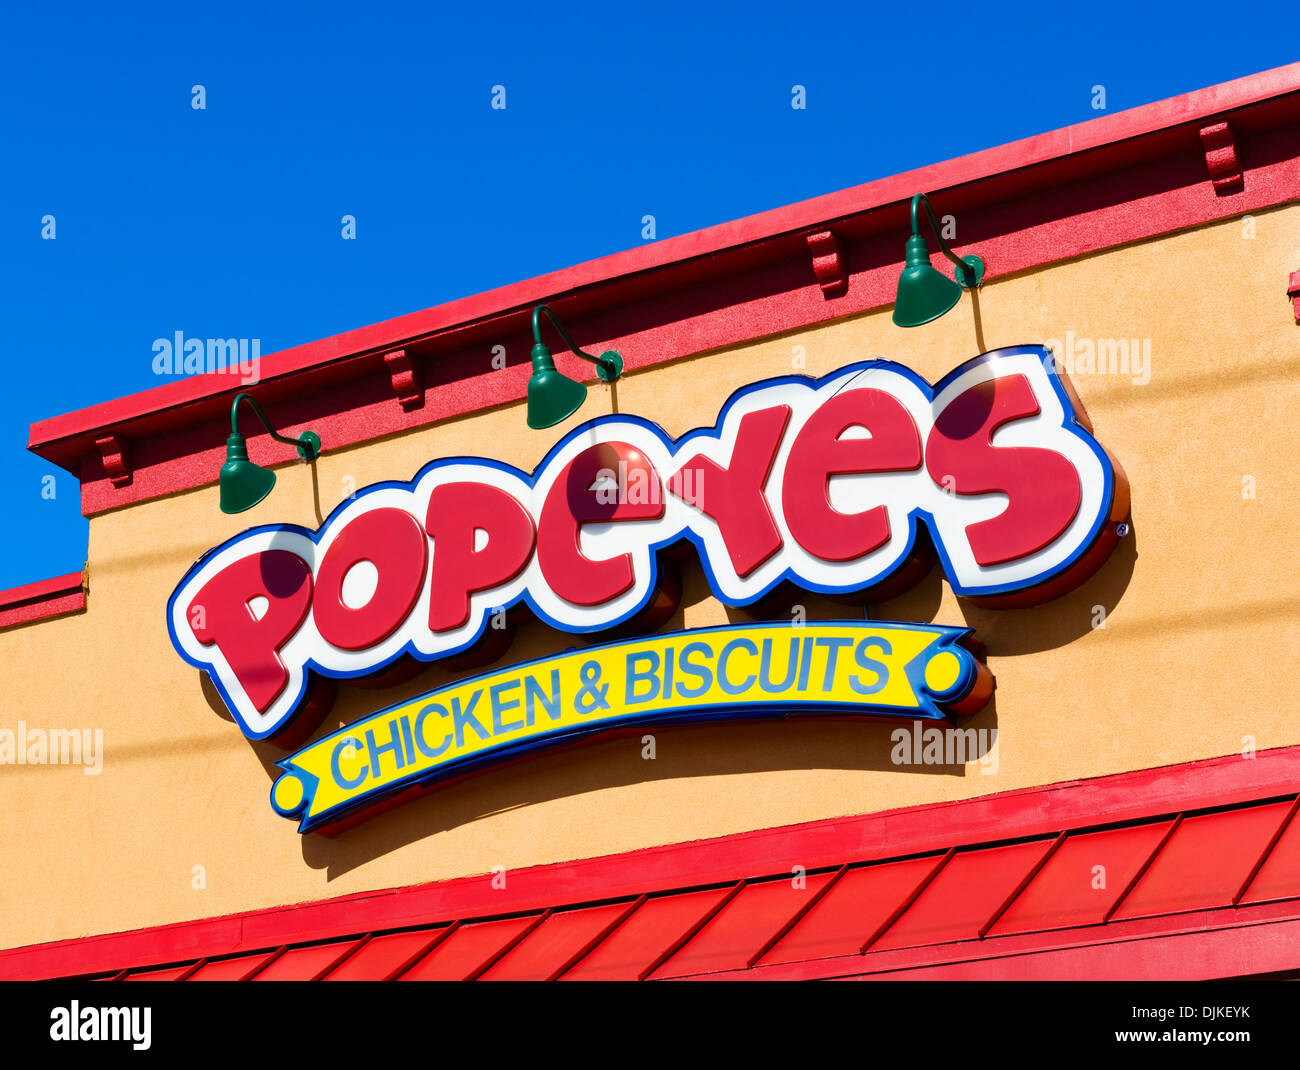 Popeye's Chicken and Biscuits restaurant sign, International Drive, Orlando, Central Florida, USA Stock Photo